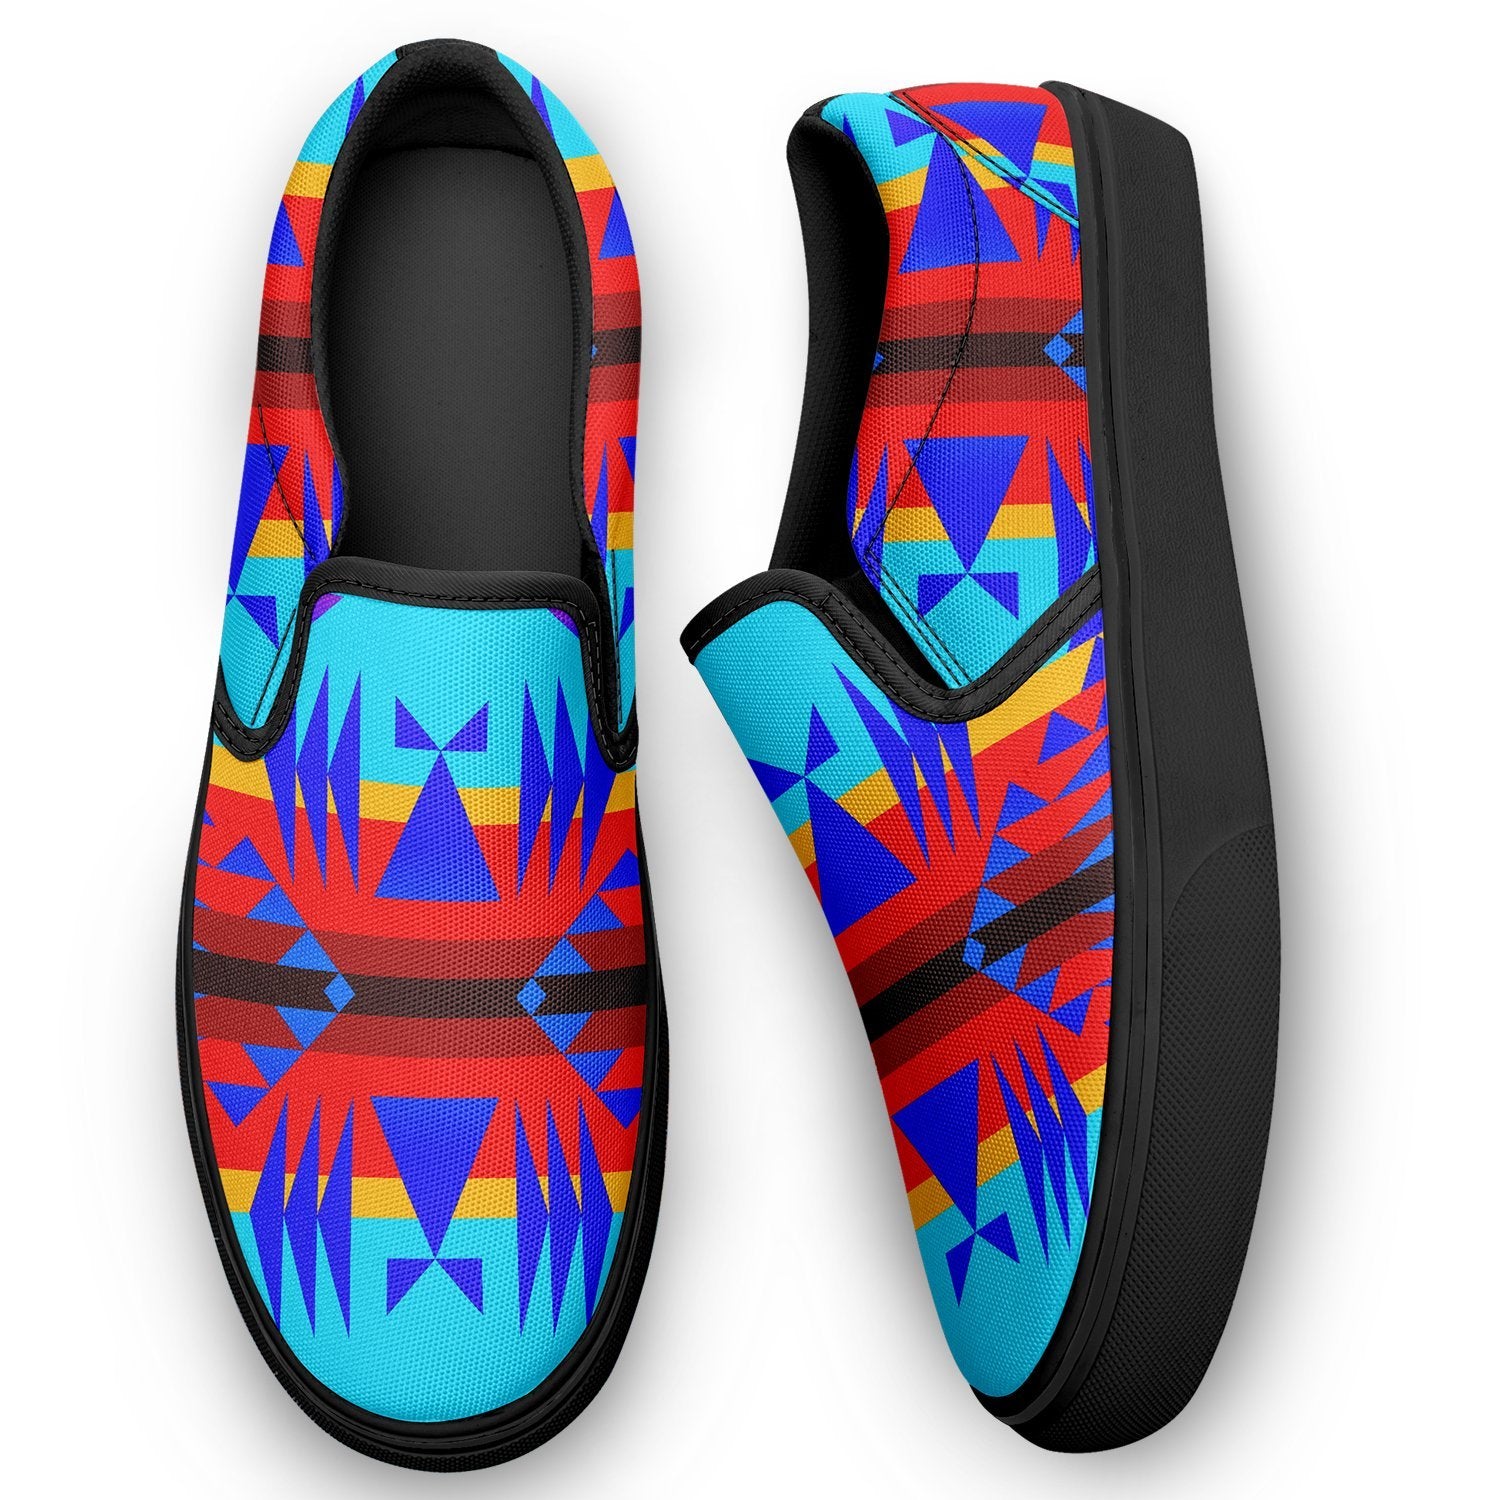 Between the Mountains Blue Otoyimm Canvas Slip On Shoes 49 Dzine 